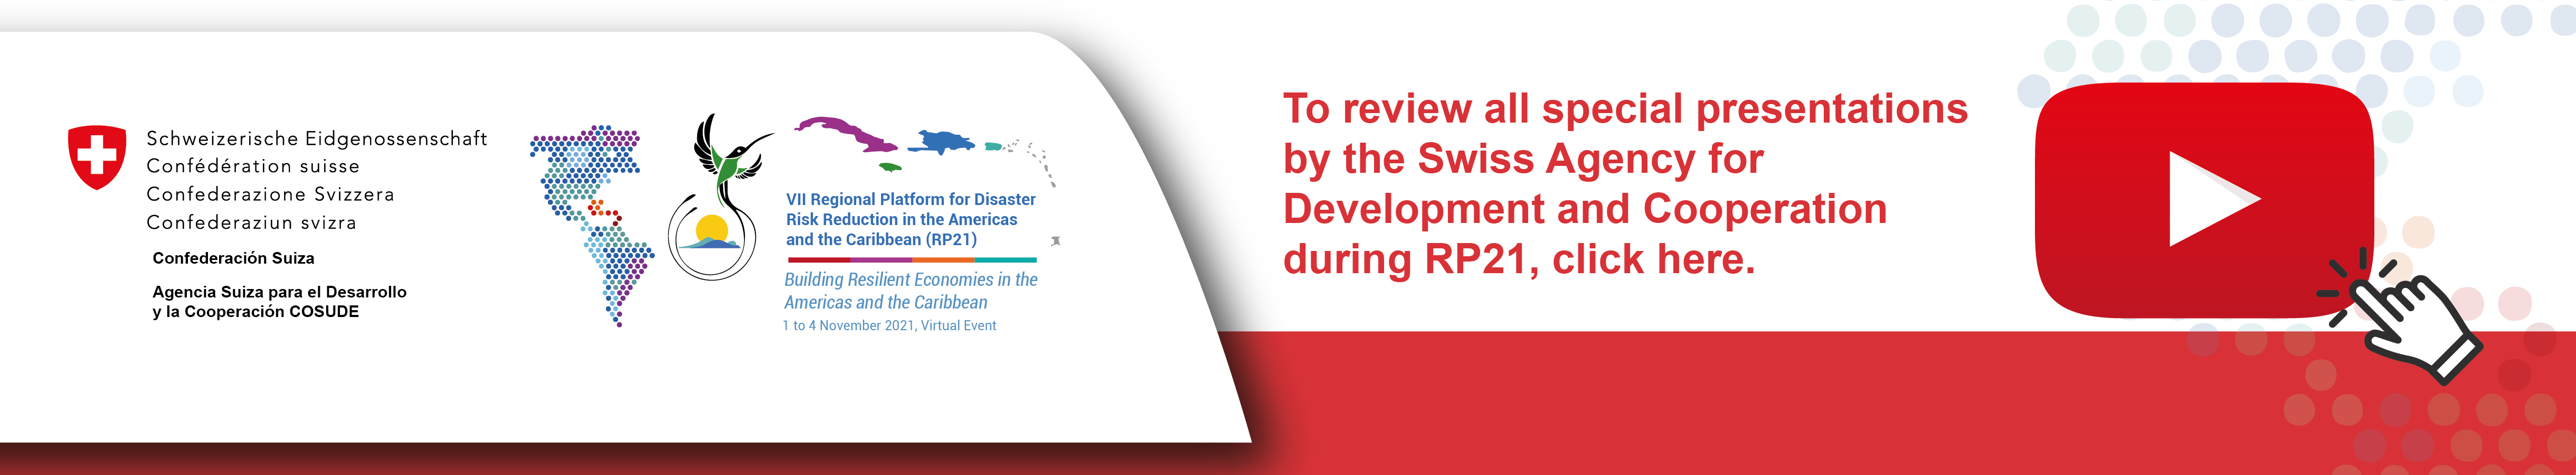 Special Presentations by the Swiss Agency for Development and Cooperation during RP21